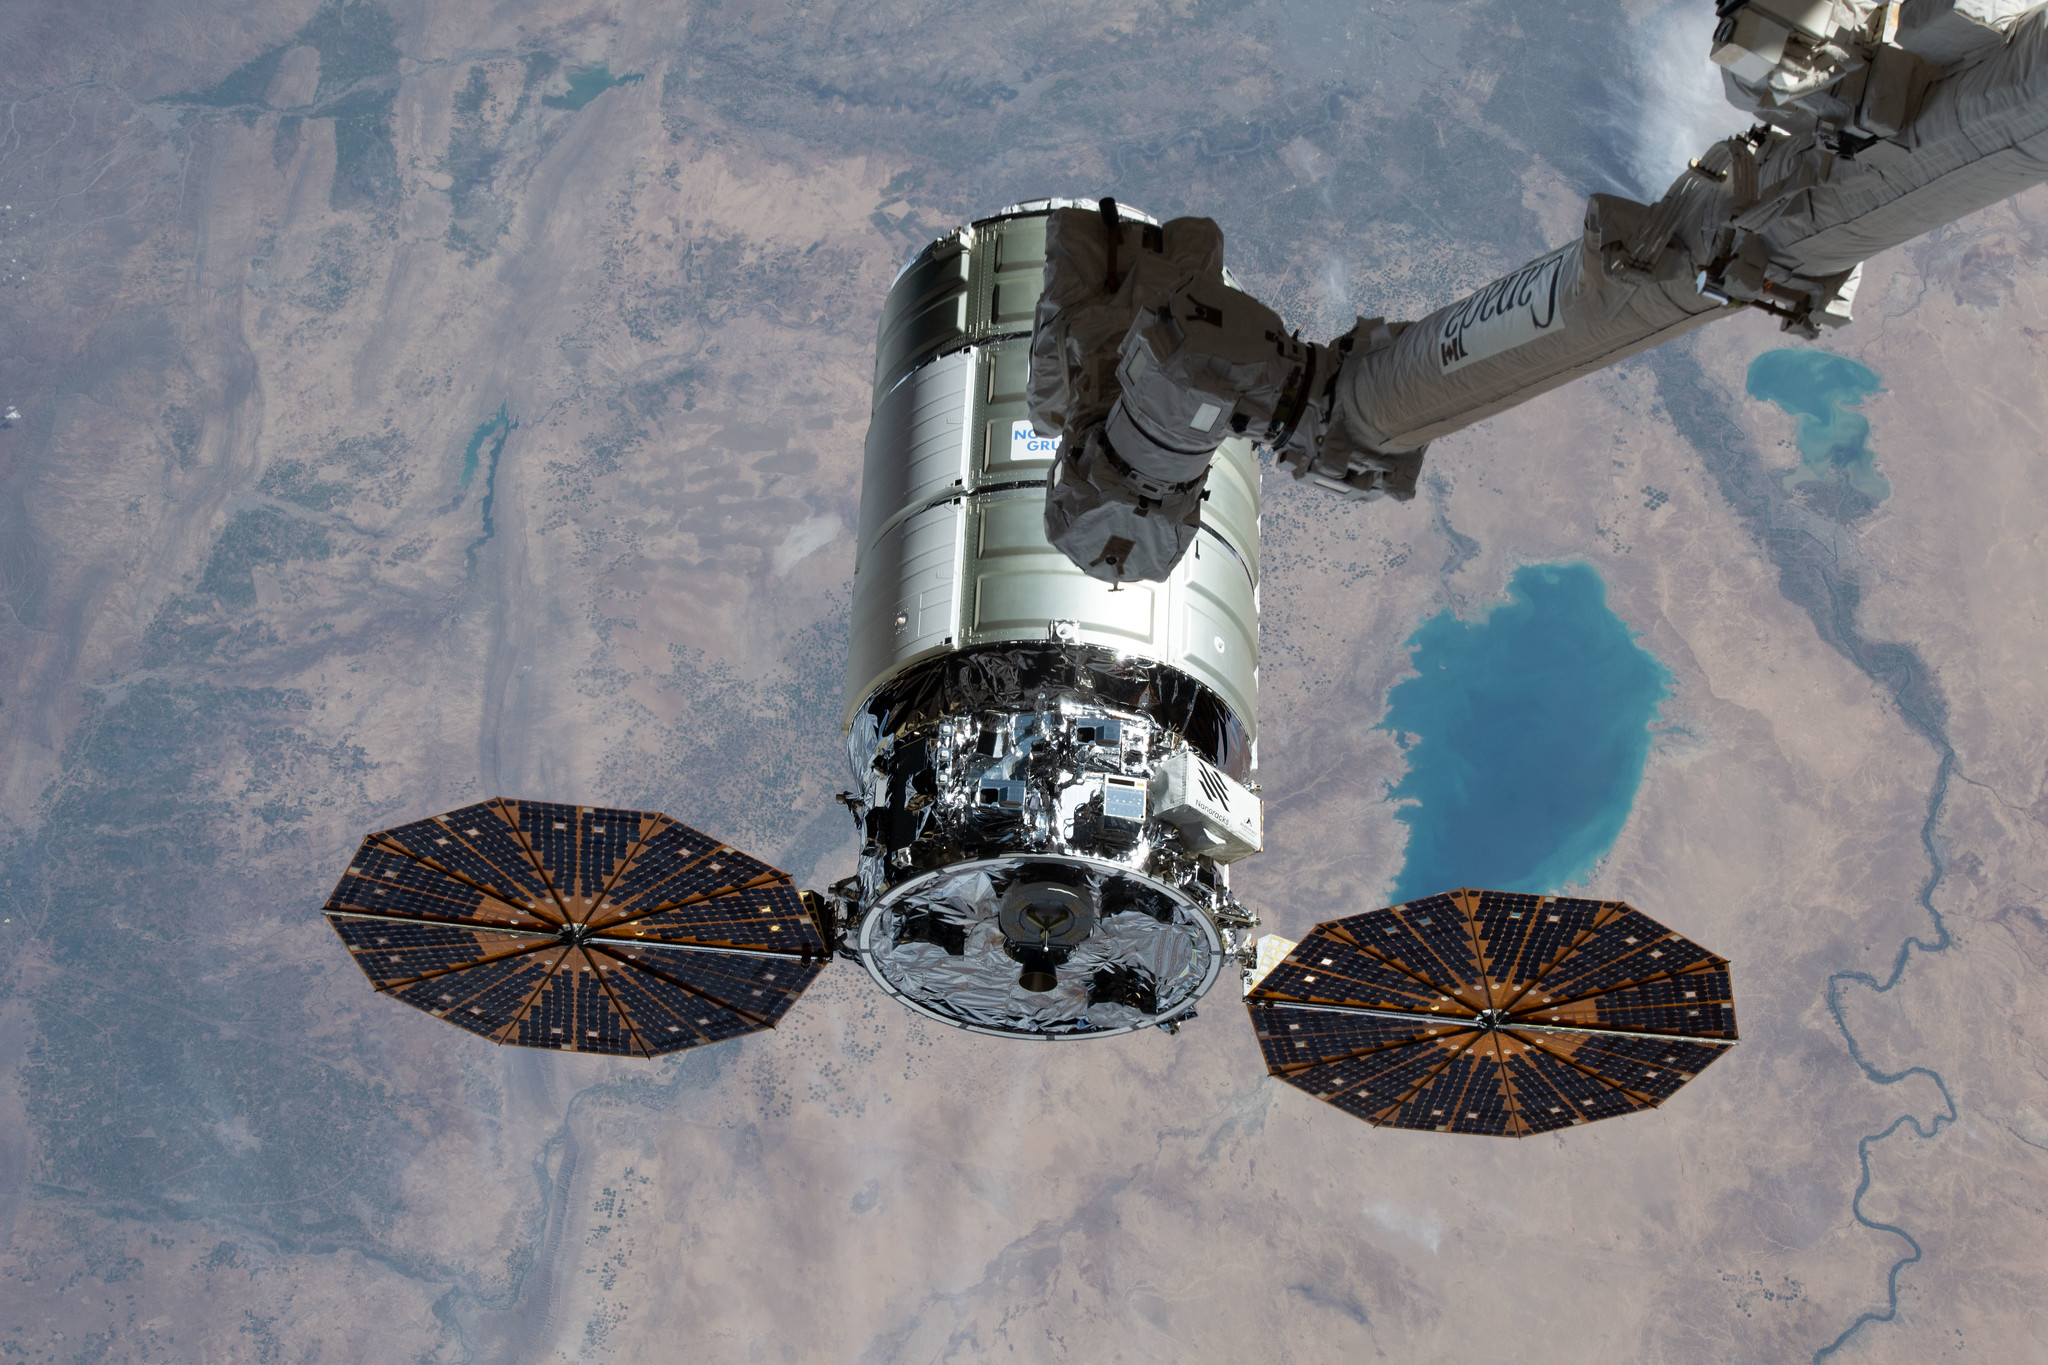 cygnus spacecraft with two solar panels with canadarm2 about to attach it at right